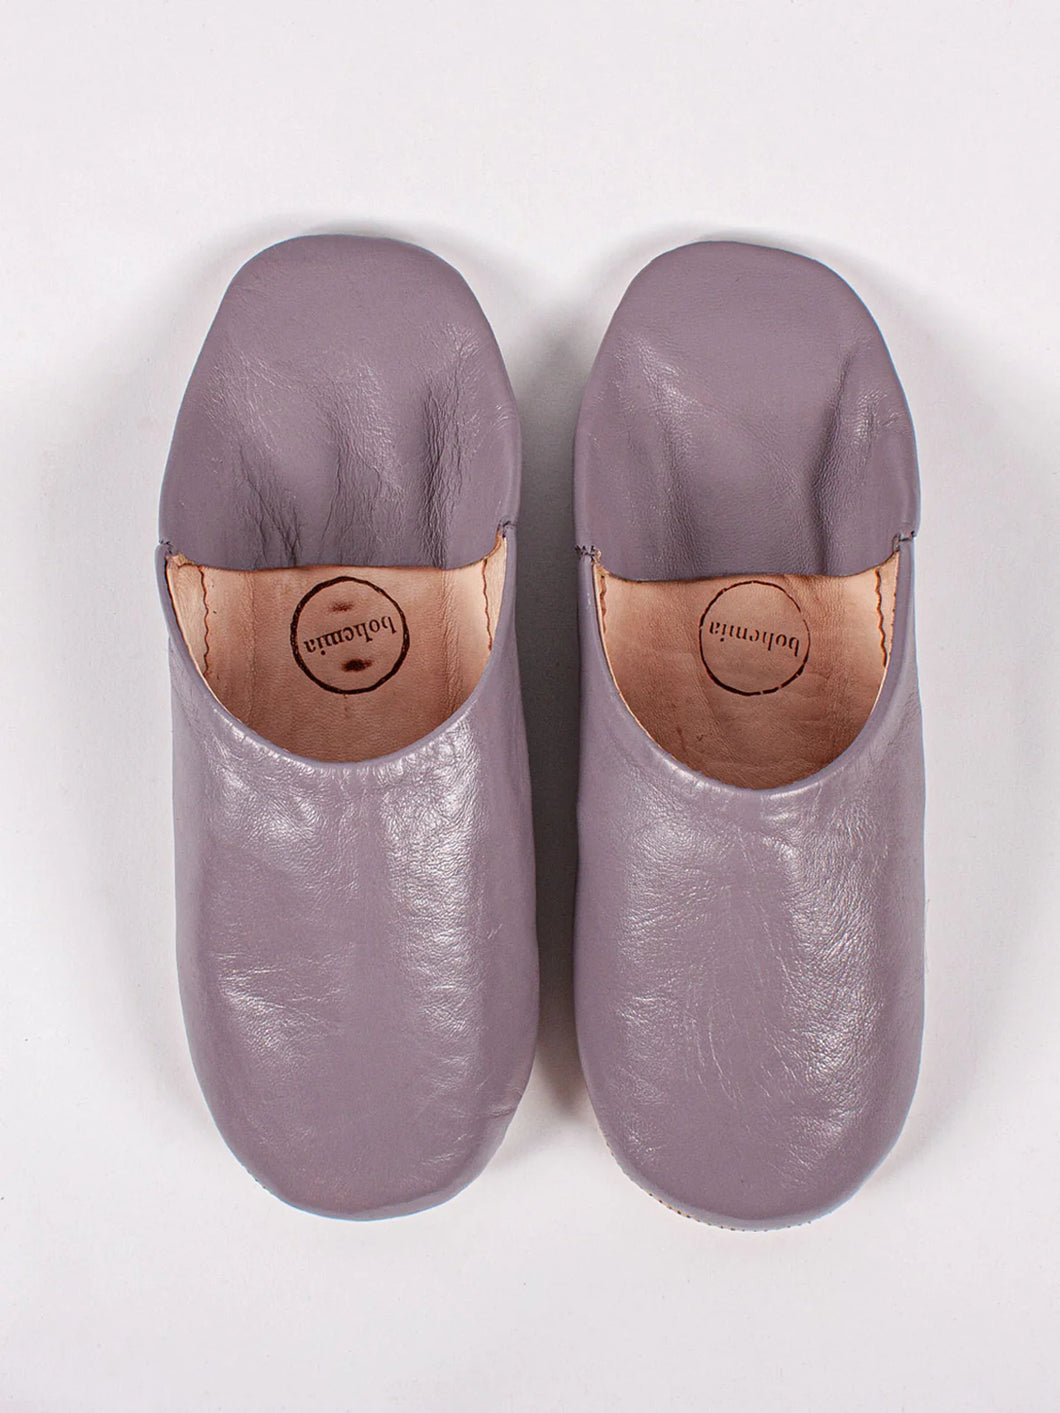 Bohemia Design Babouche Slippers in Violet | ATWIN Store UK